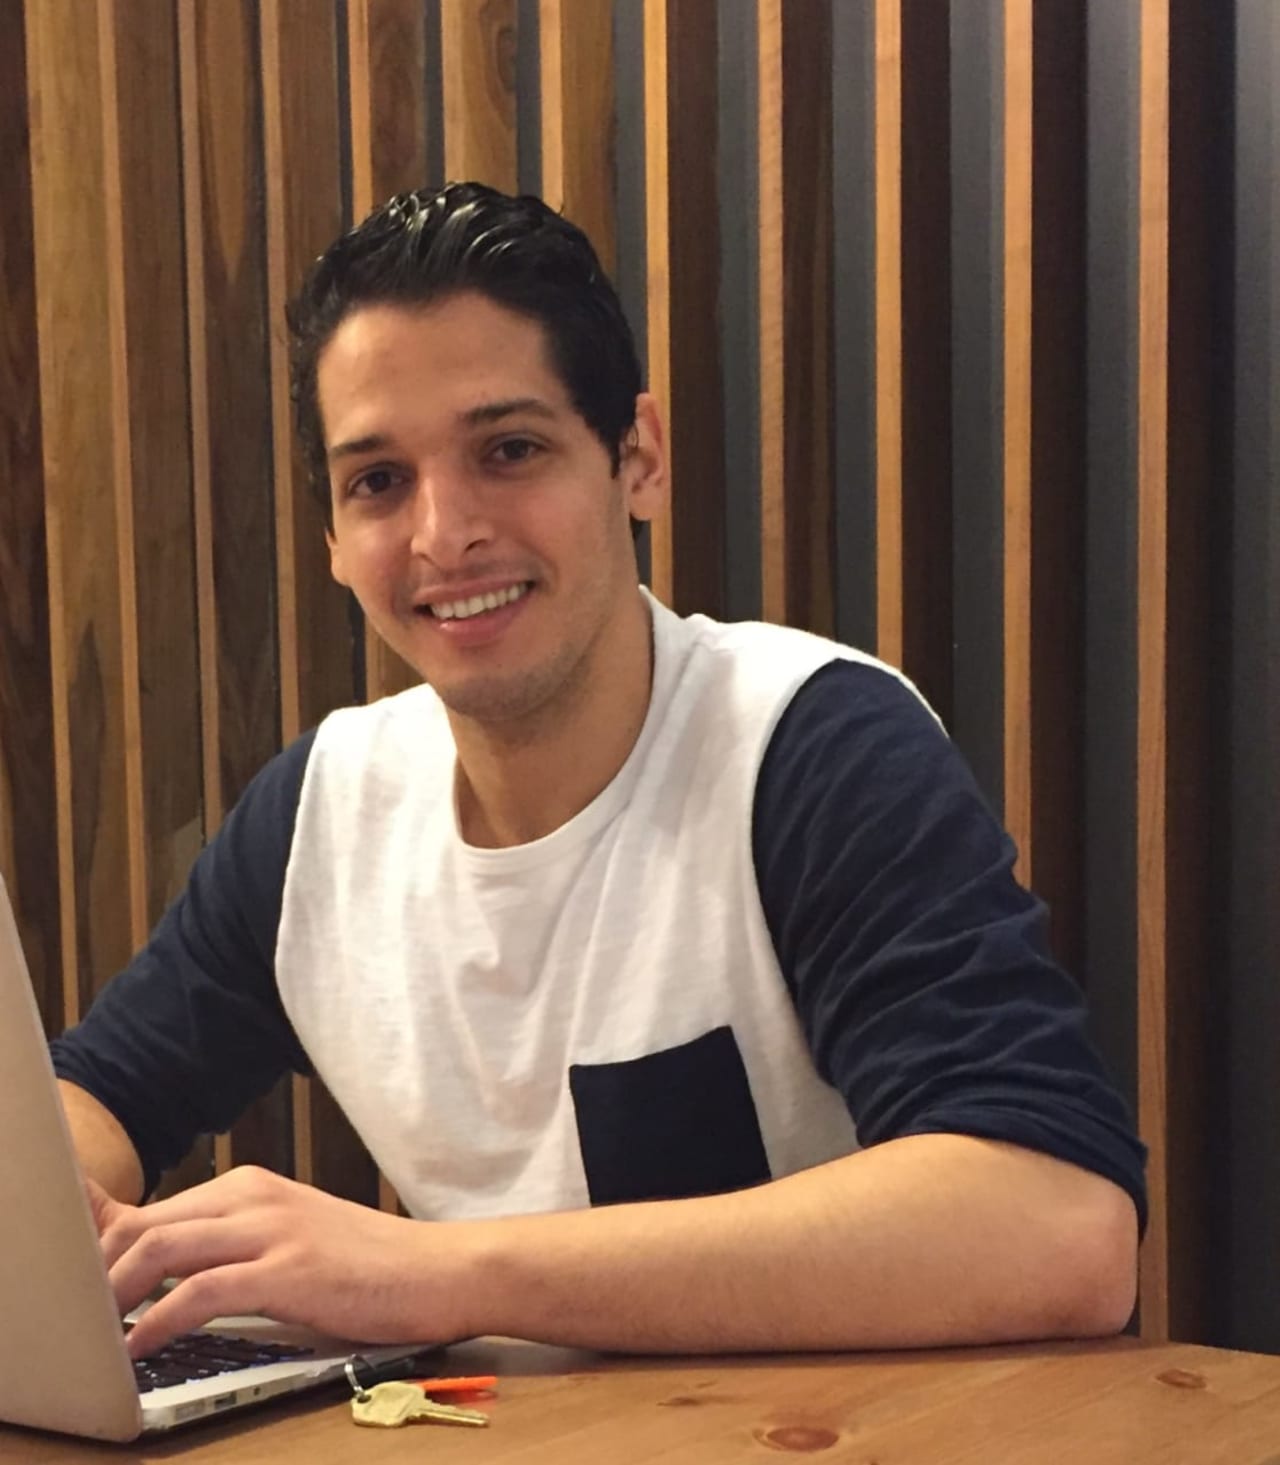 Pace alum Mohamed Merzouk's new app is hoping to revolutionize the way New Yorkers order food.